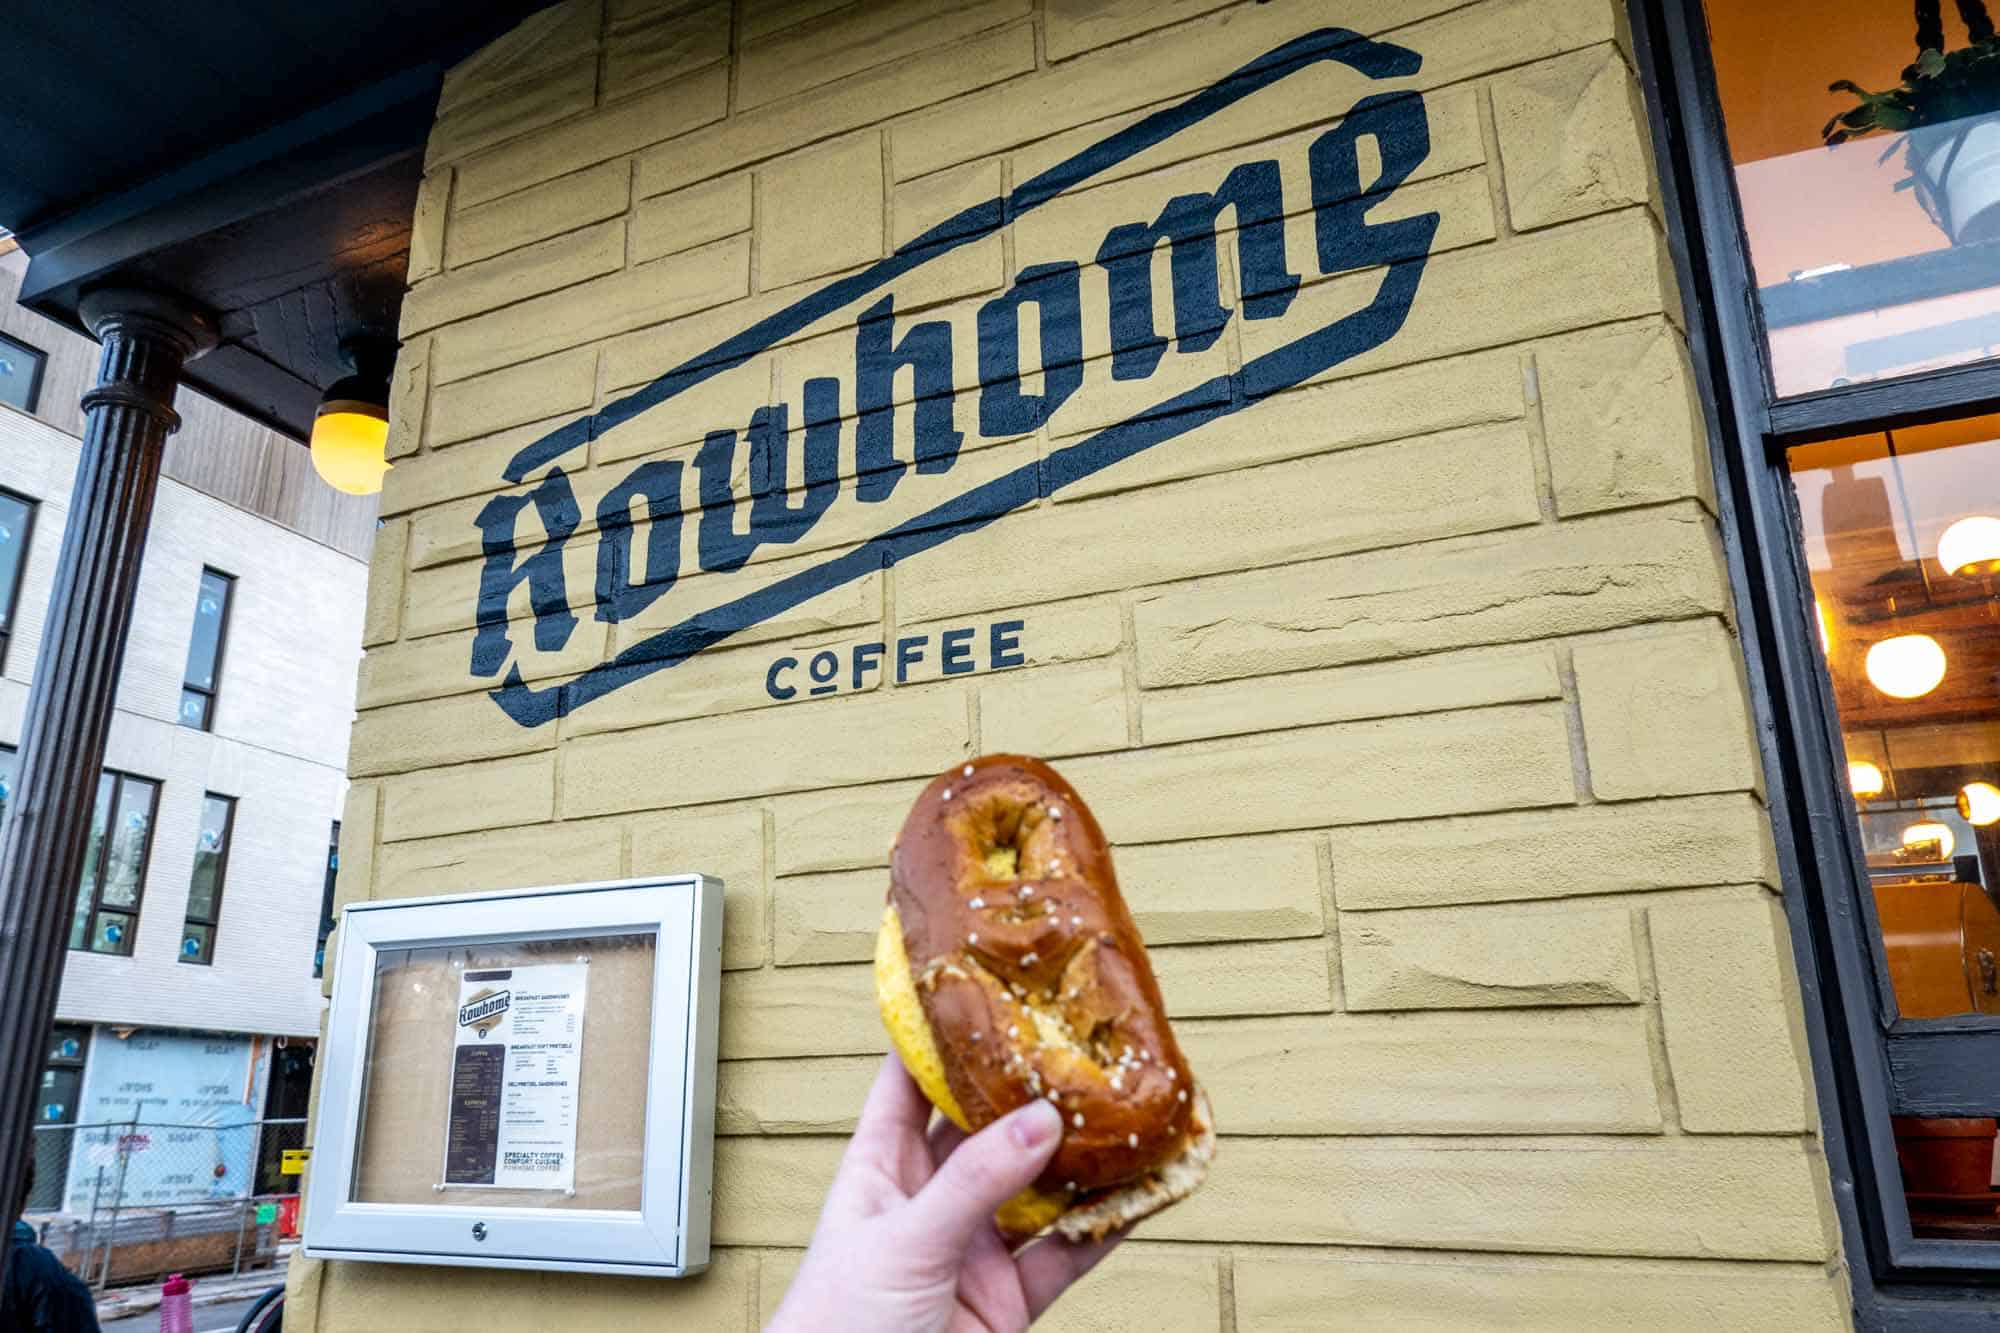 Hand holding a pretzel sandwich in front of a sign for "Rowhome Coffee."